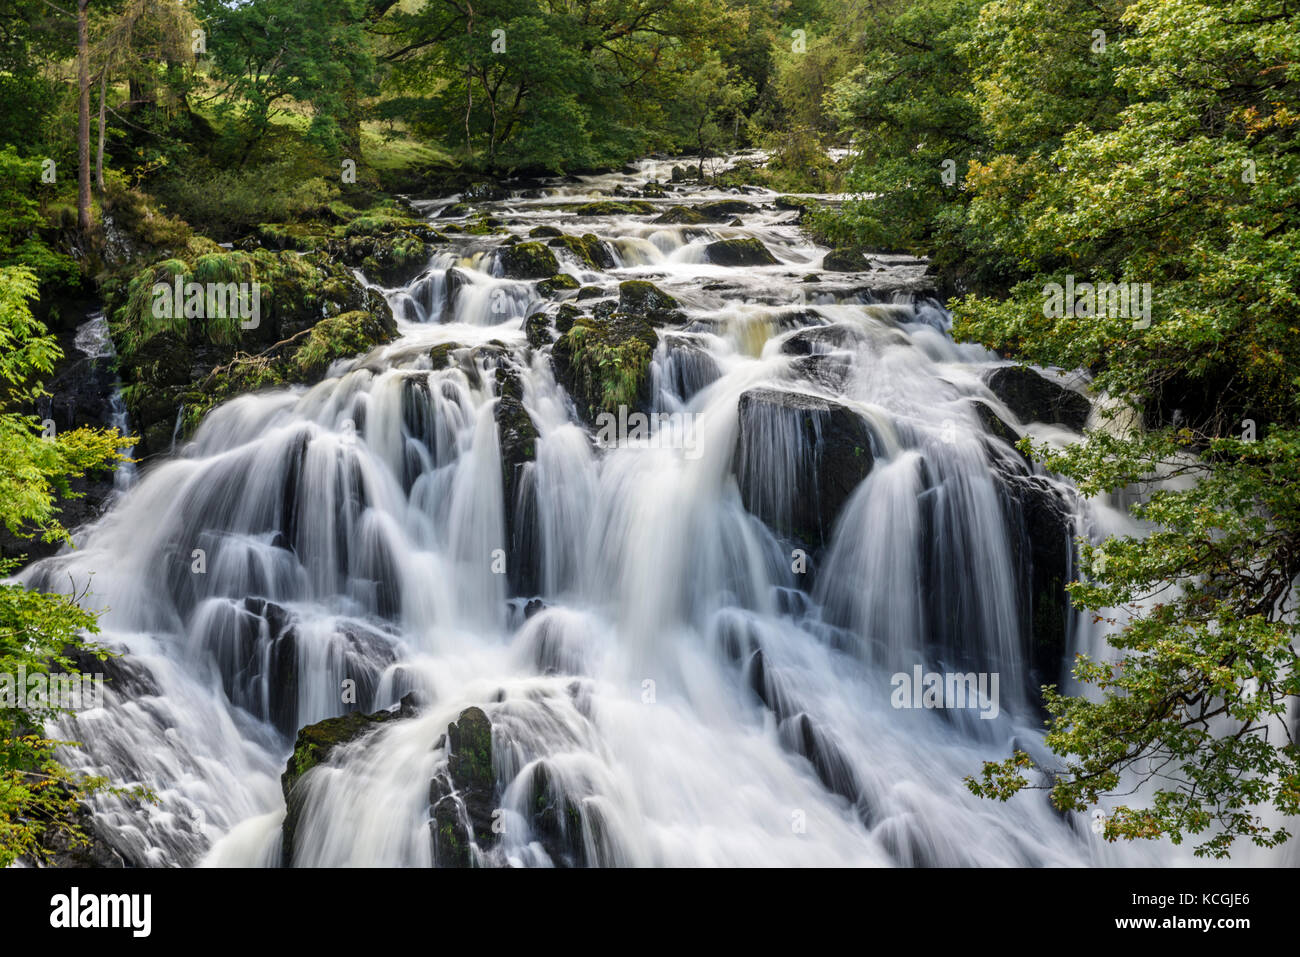 Swallow Falls, Betws-y-Coed, Snowdonia National Park, Conwy, Wales Stock Photo